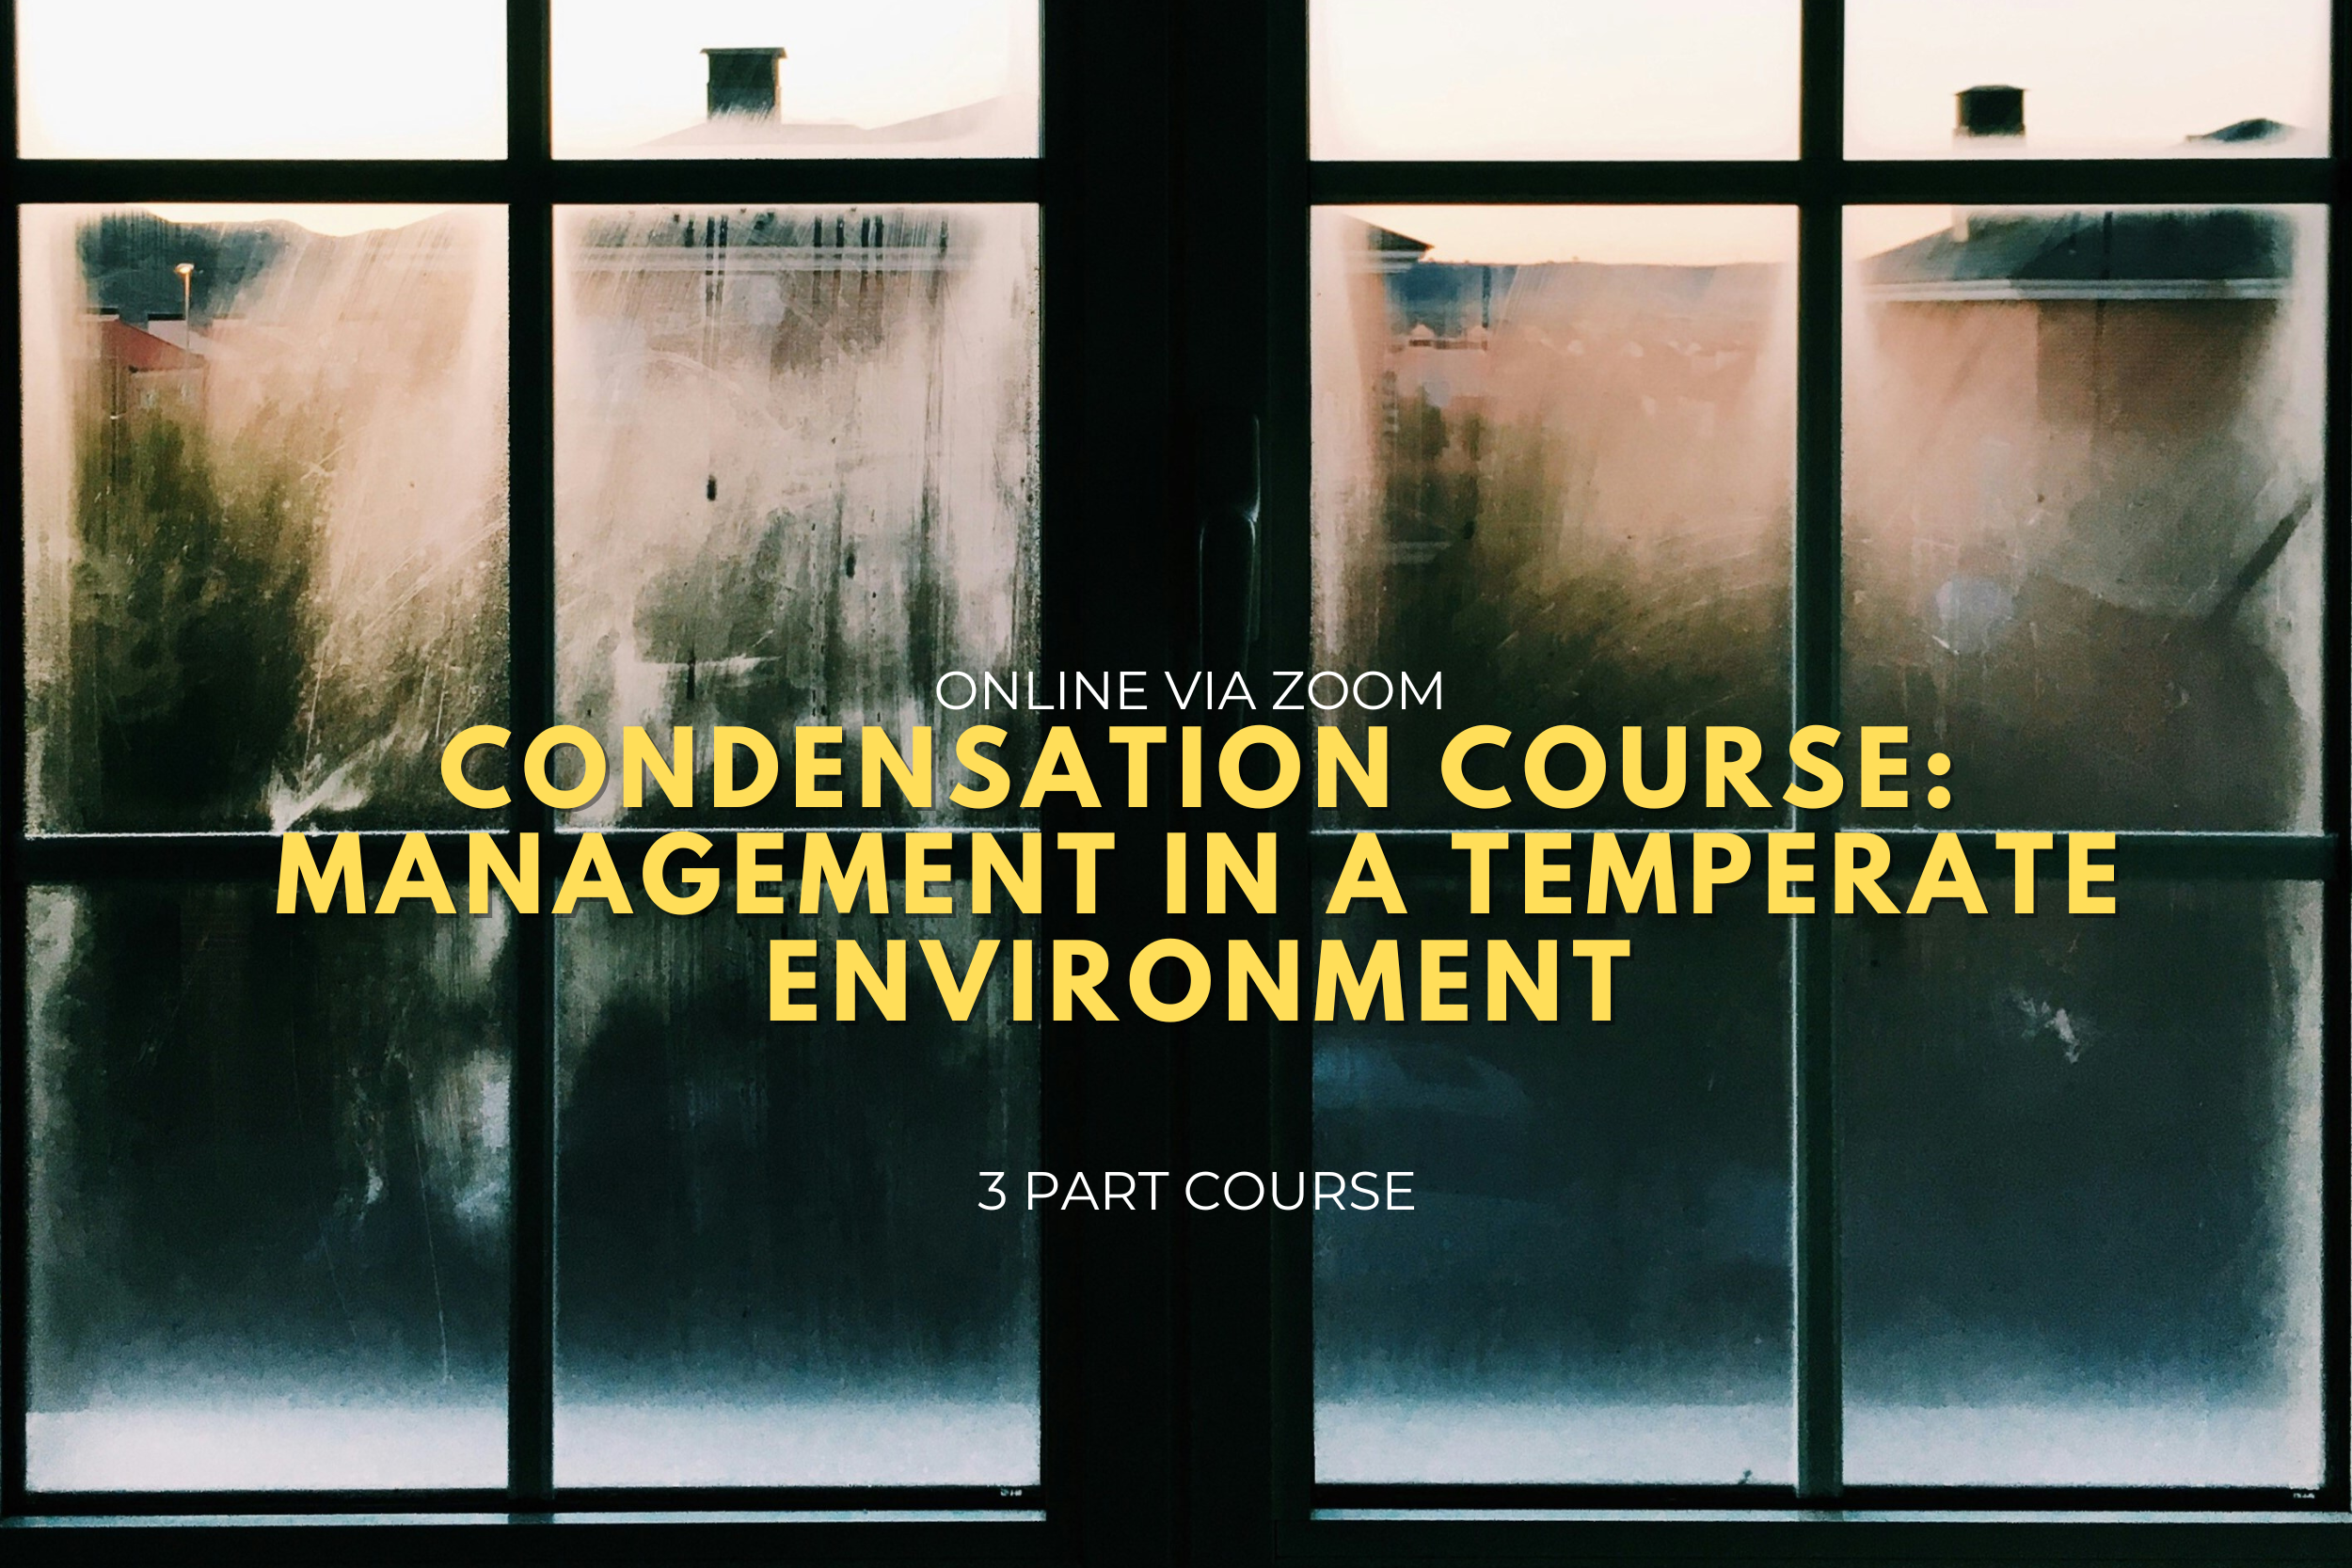 Condensation course: Management in a temperate environment